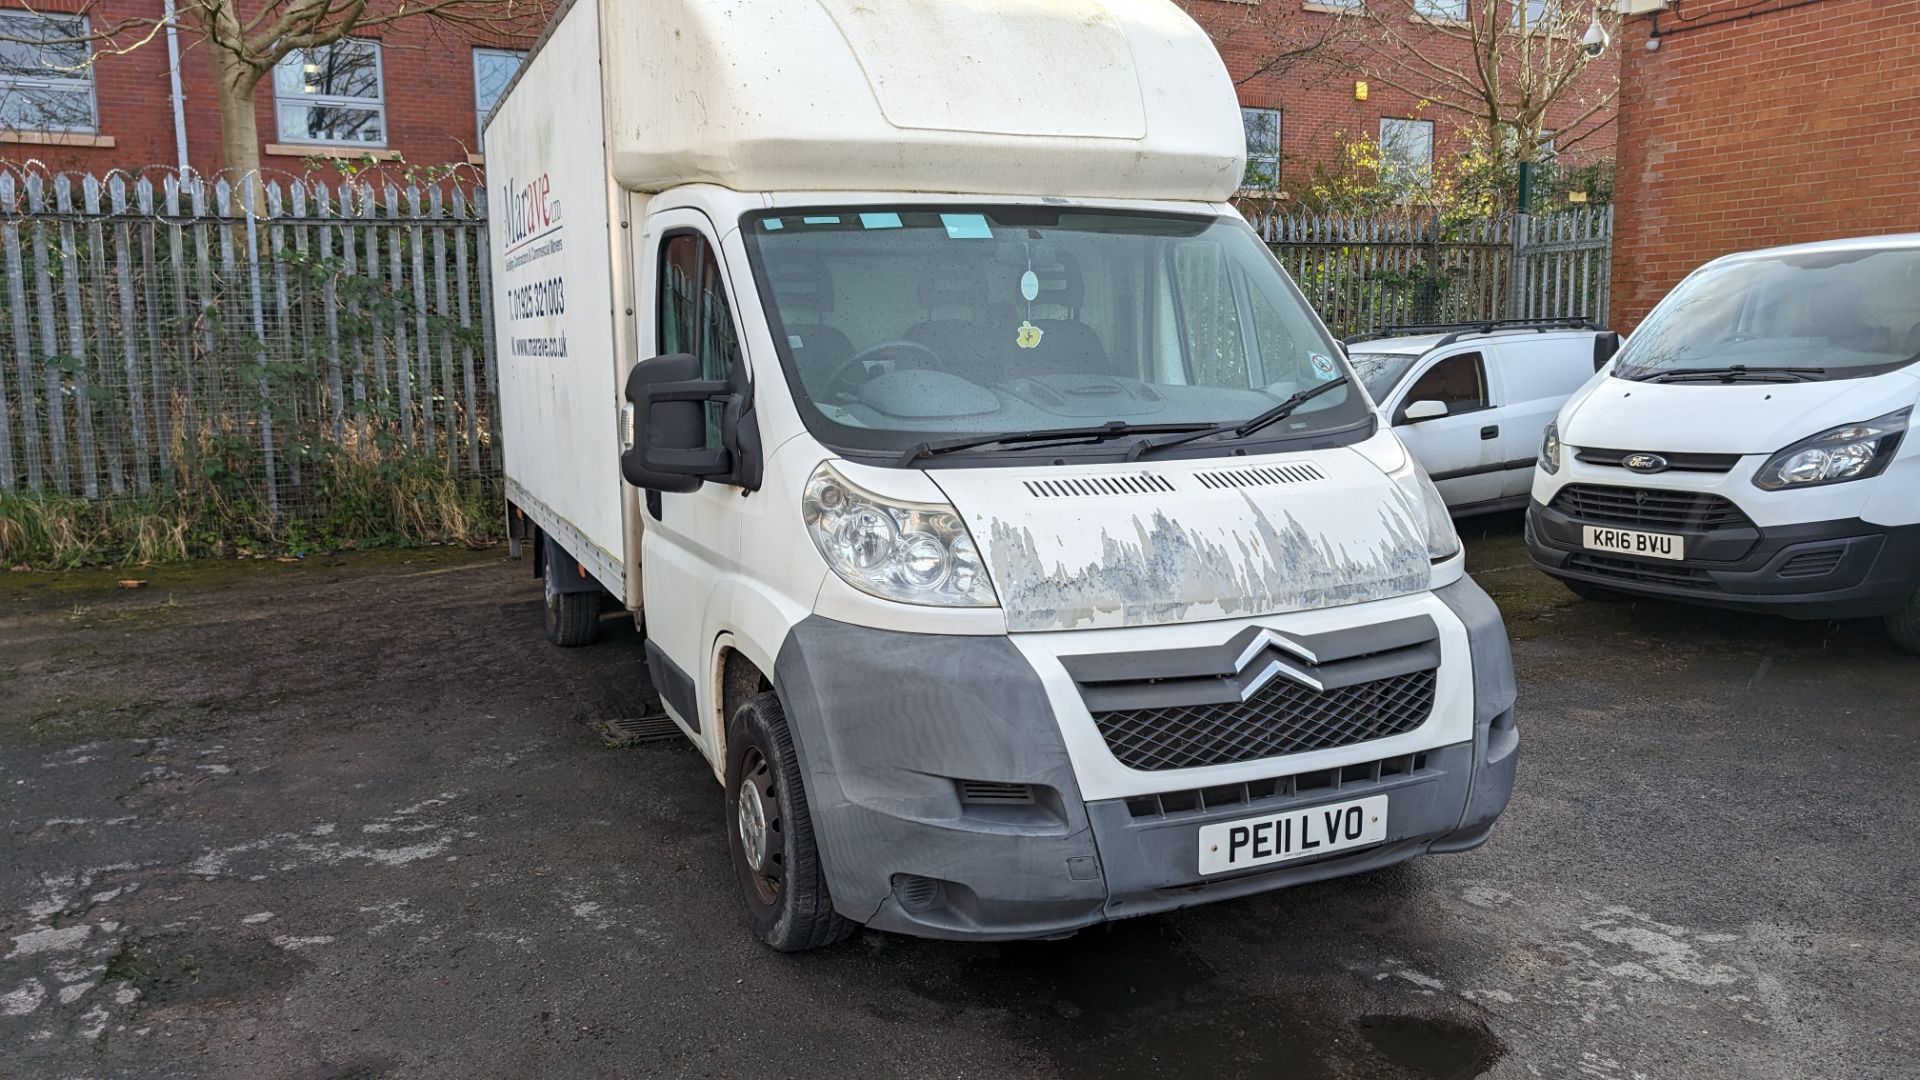 2011 Citroen Relay Luton van with tail lift - Image 2 of 17